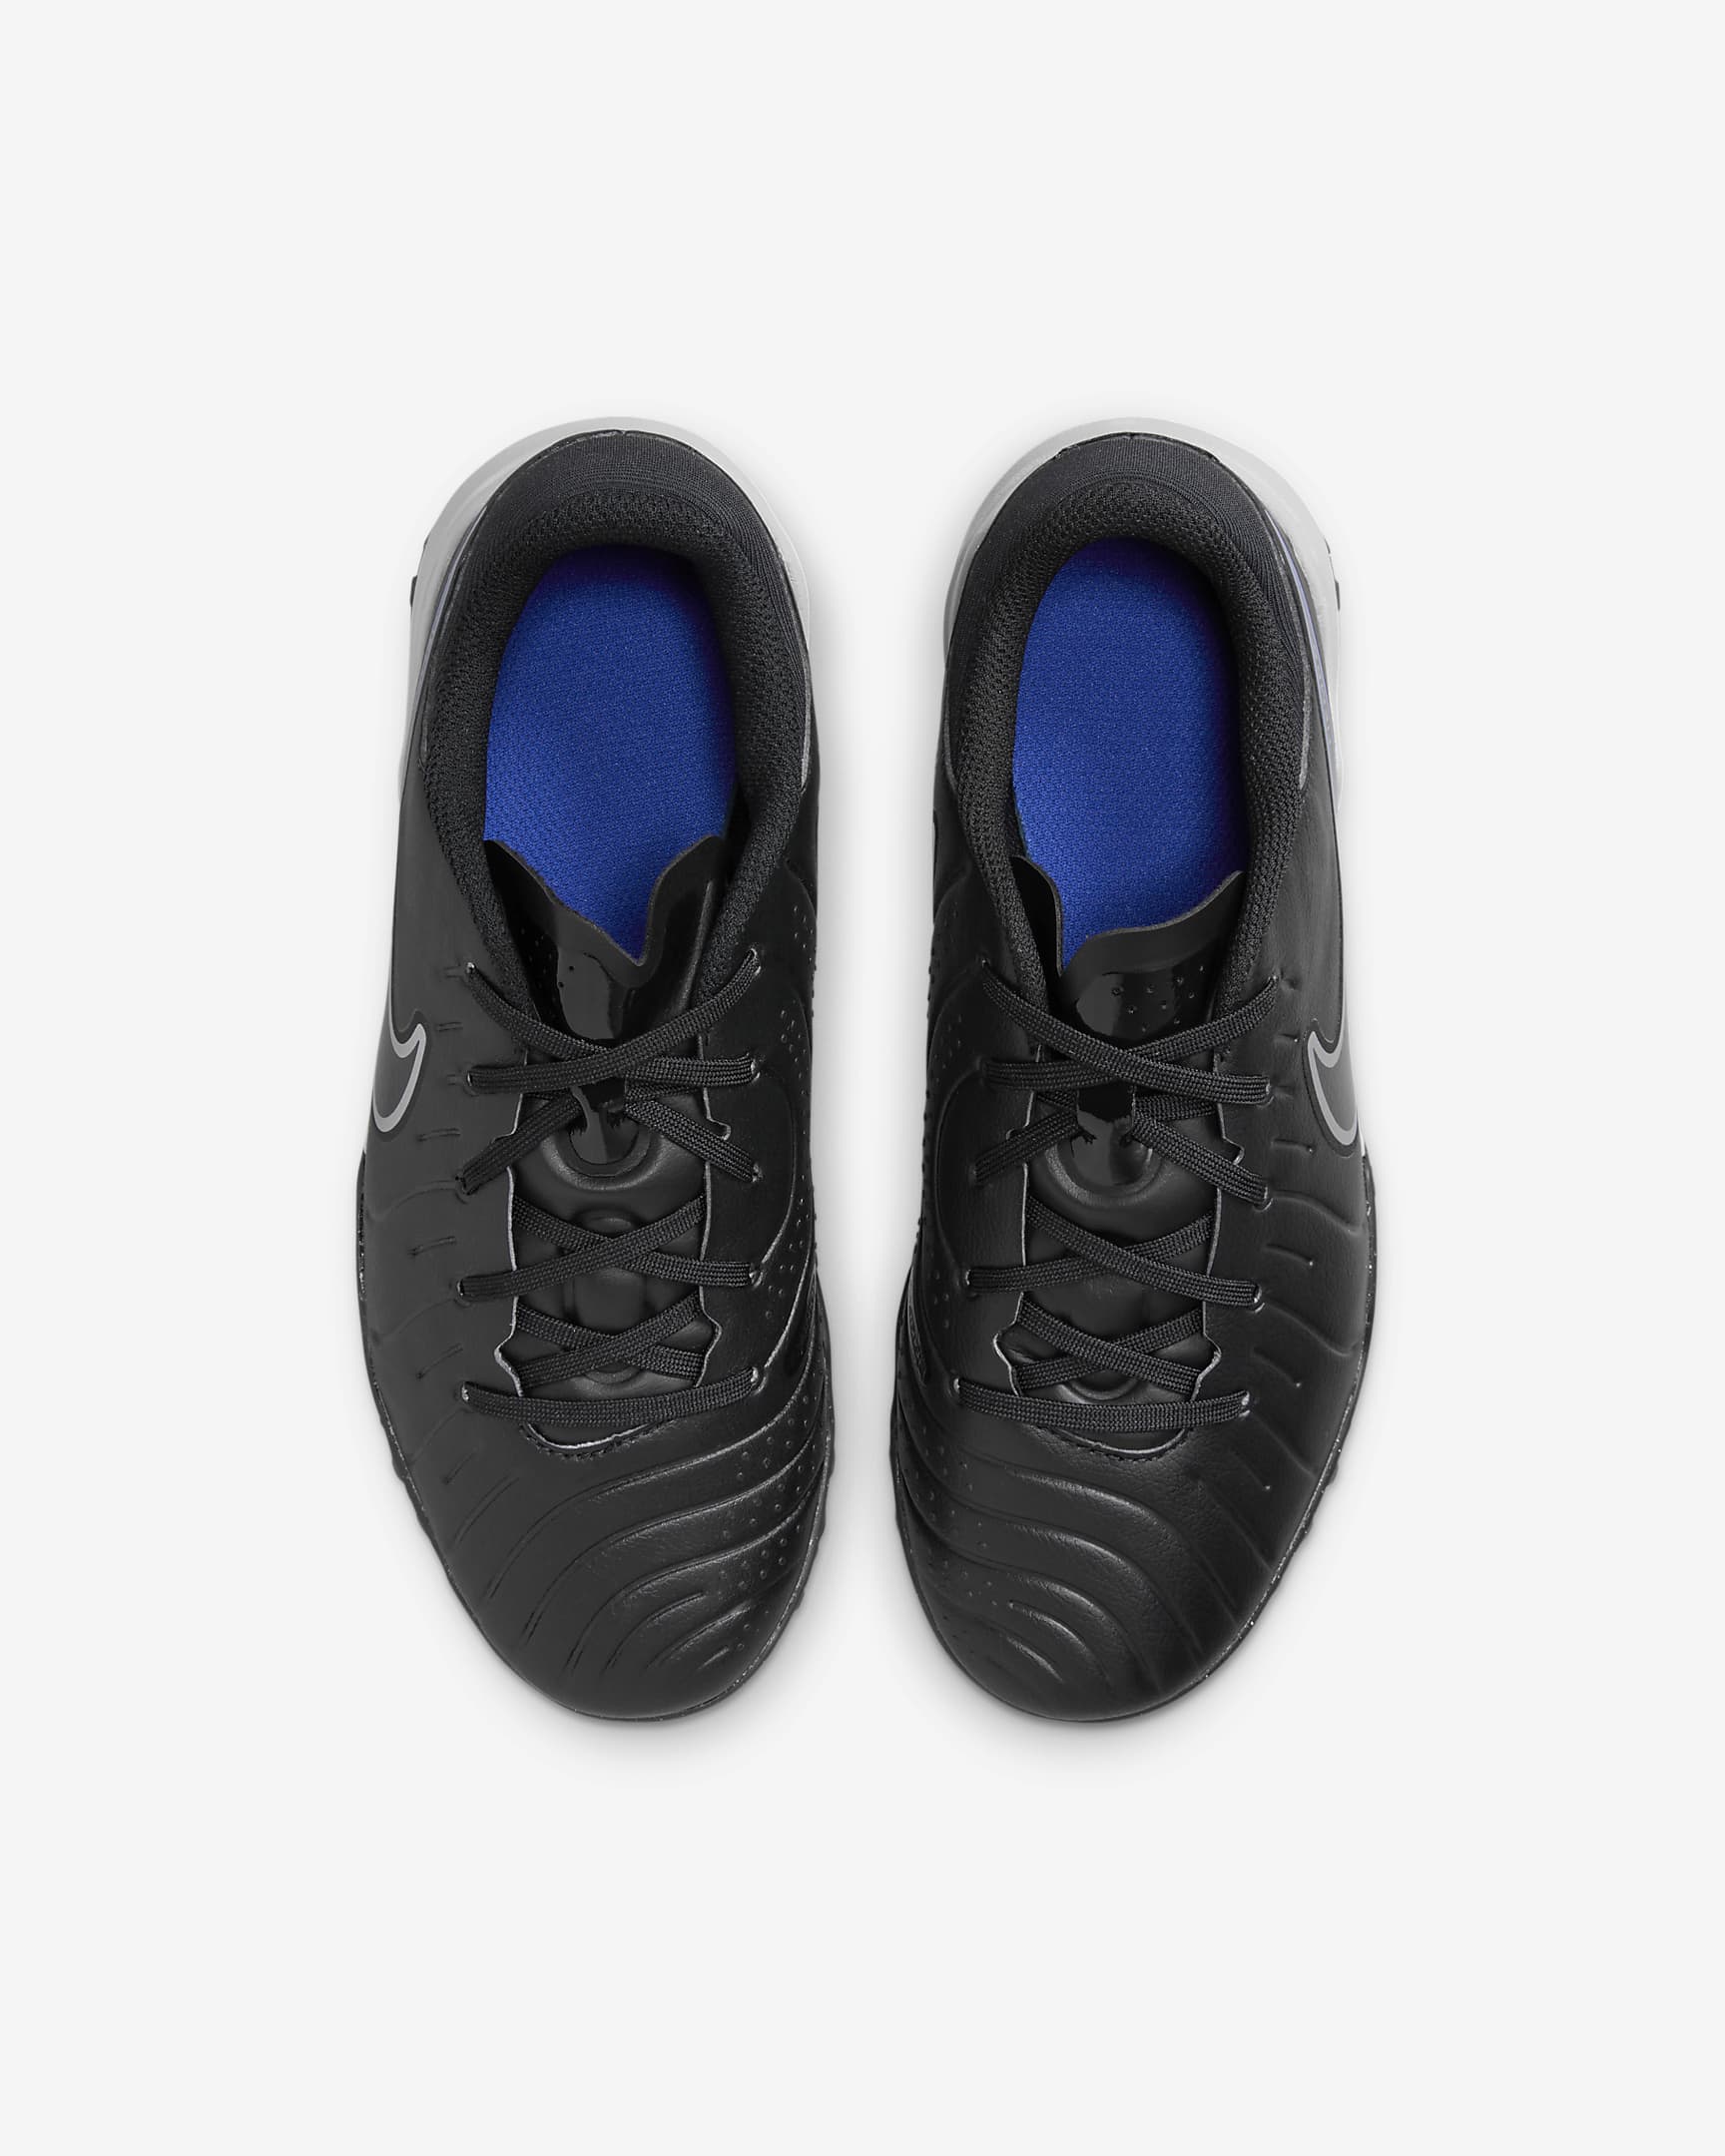 Nike Jr. Tiempo Legend 10 Academy Younger/Older Kids' Turf Low-Top Football Shoes - Black/Hyper Royal/Chrome